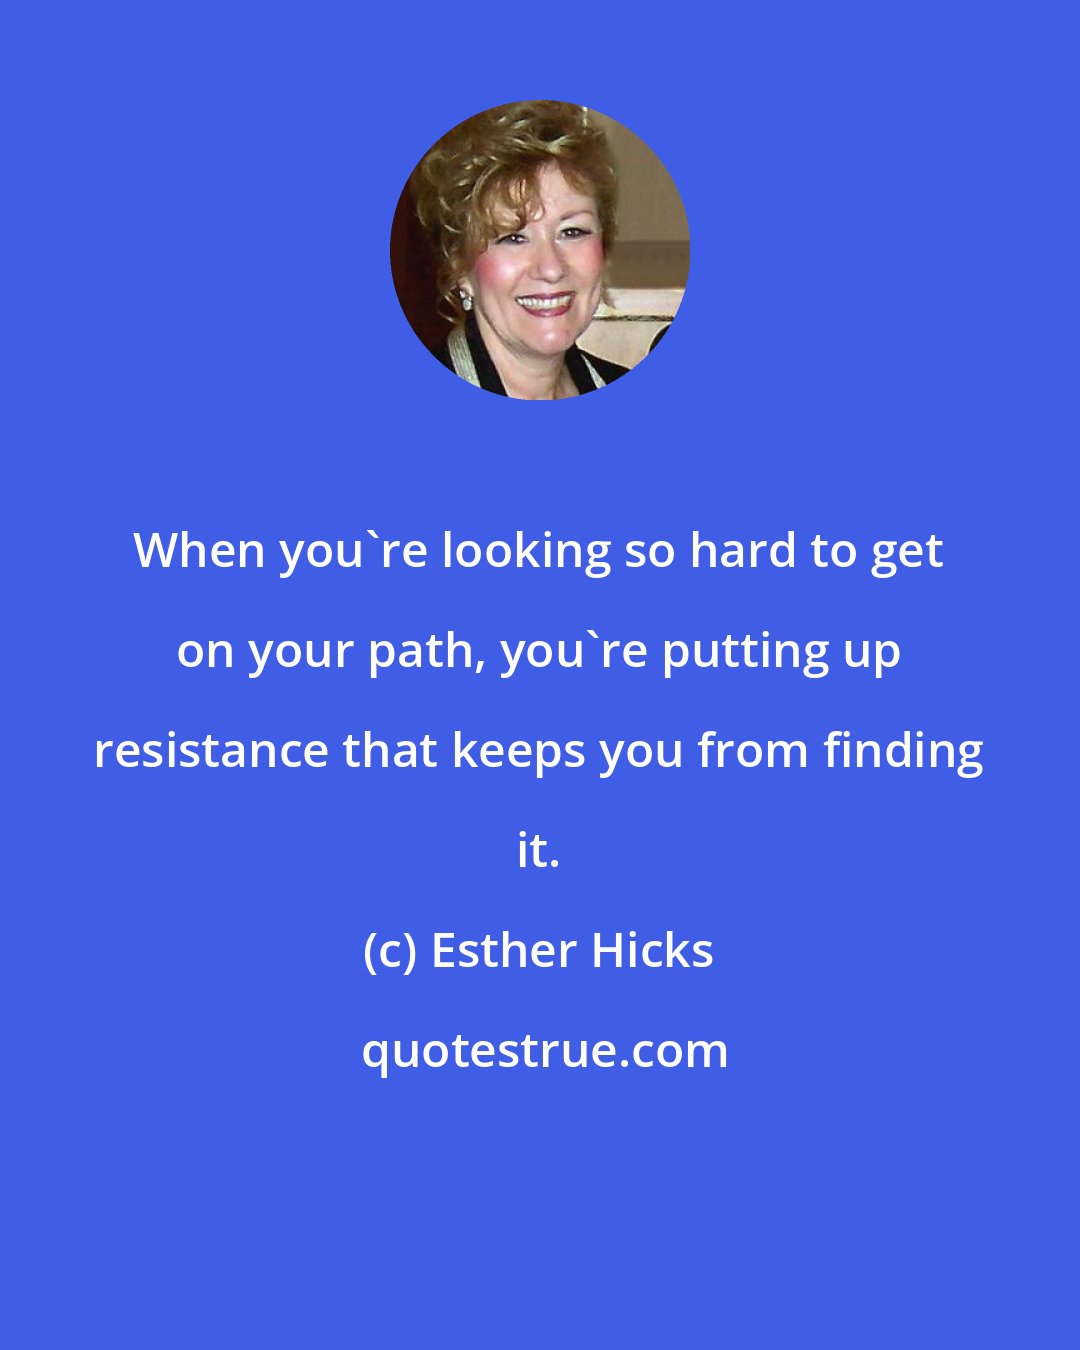 Esther Hicks: When you're looking so hard to get on your path, you're putting up resistance that keeps you from finding it.